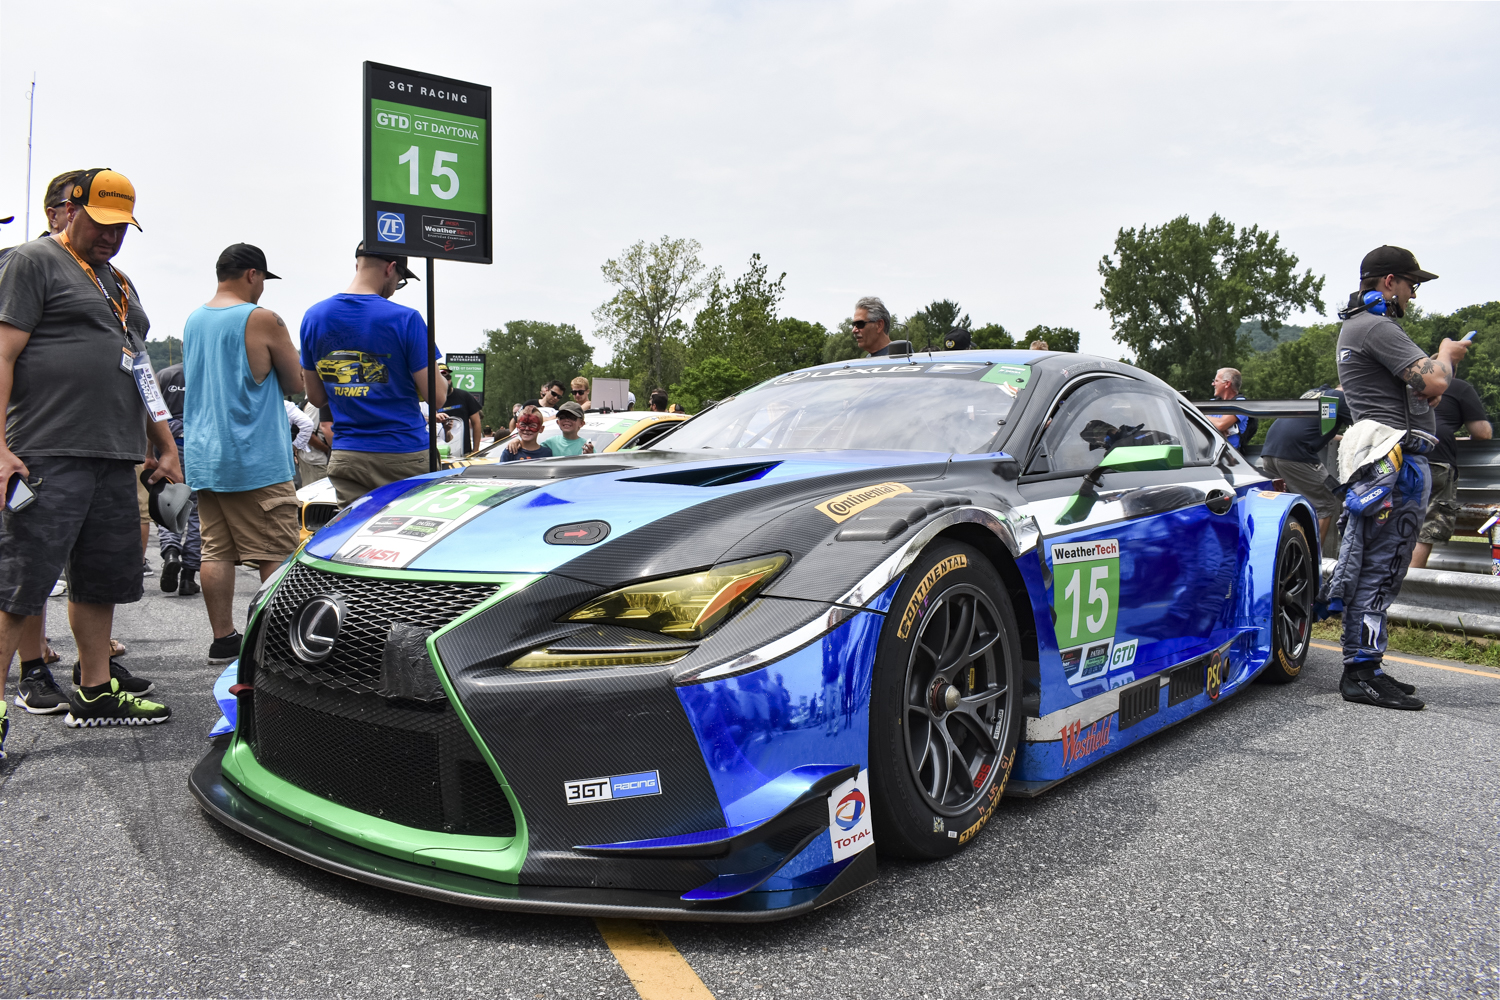 Wide shot of the Lexus RC F GT3 angled to the left